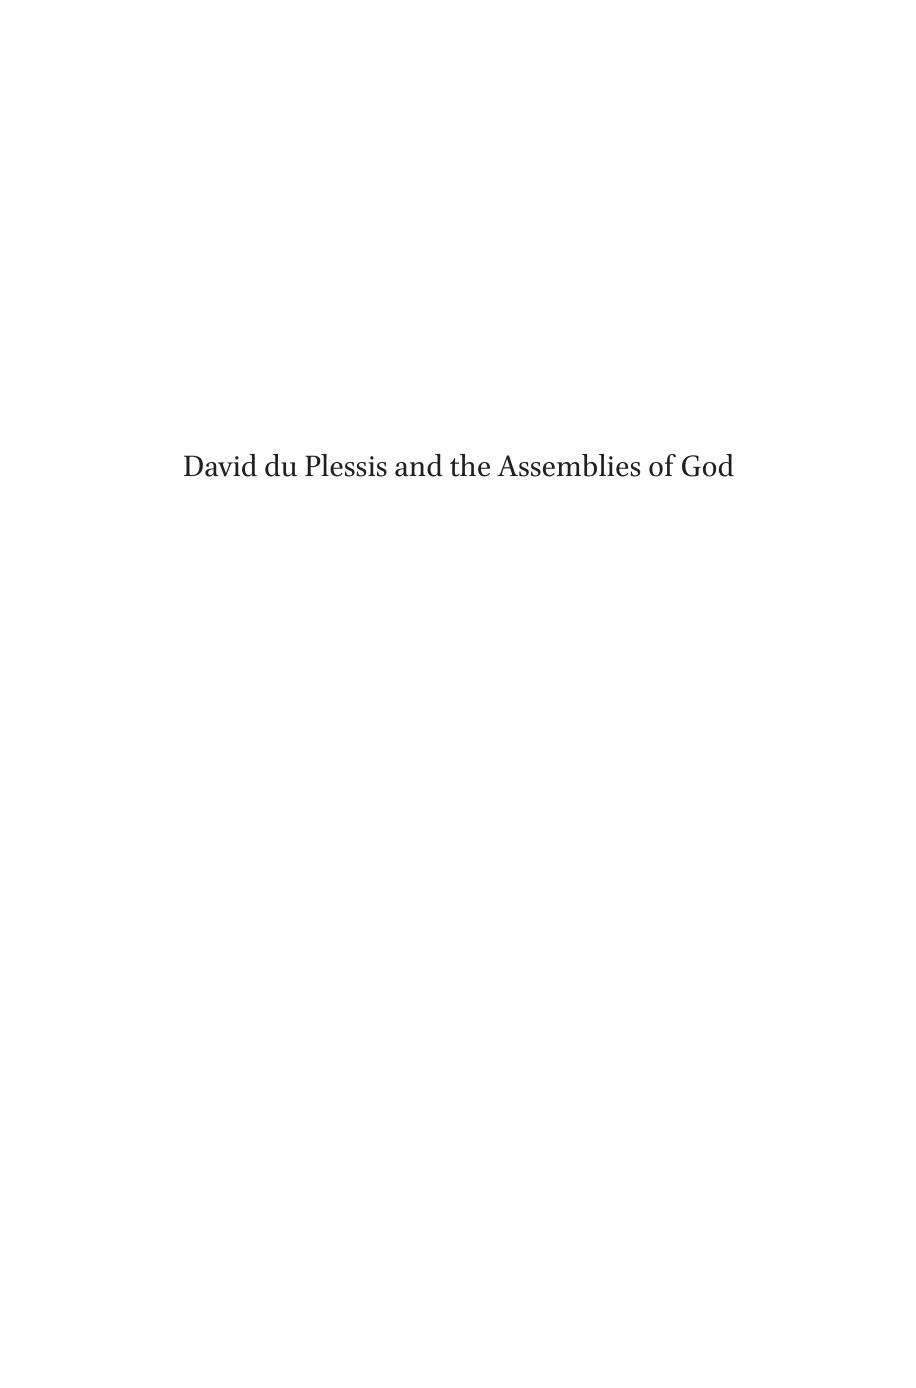 David du Plessis and the Assemblies of God : The Struggle for the Soul of a Movement by Joshua R. Ziefle